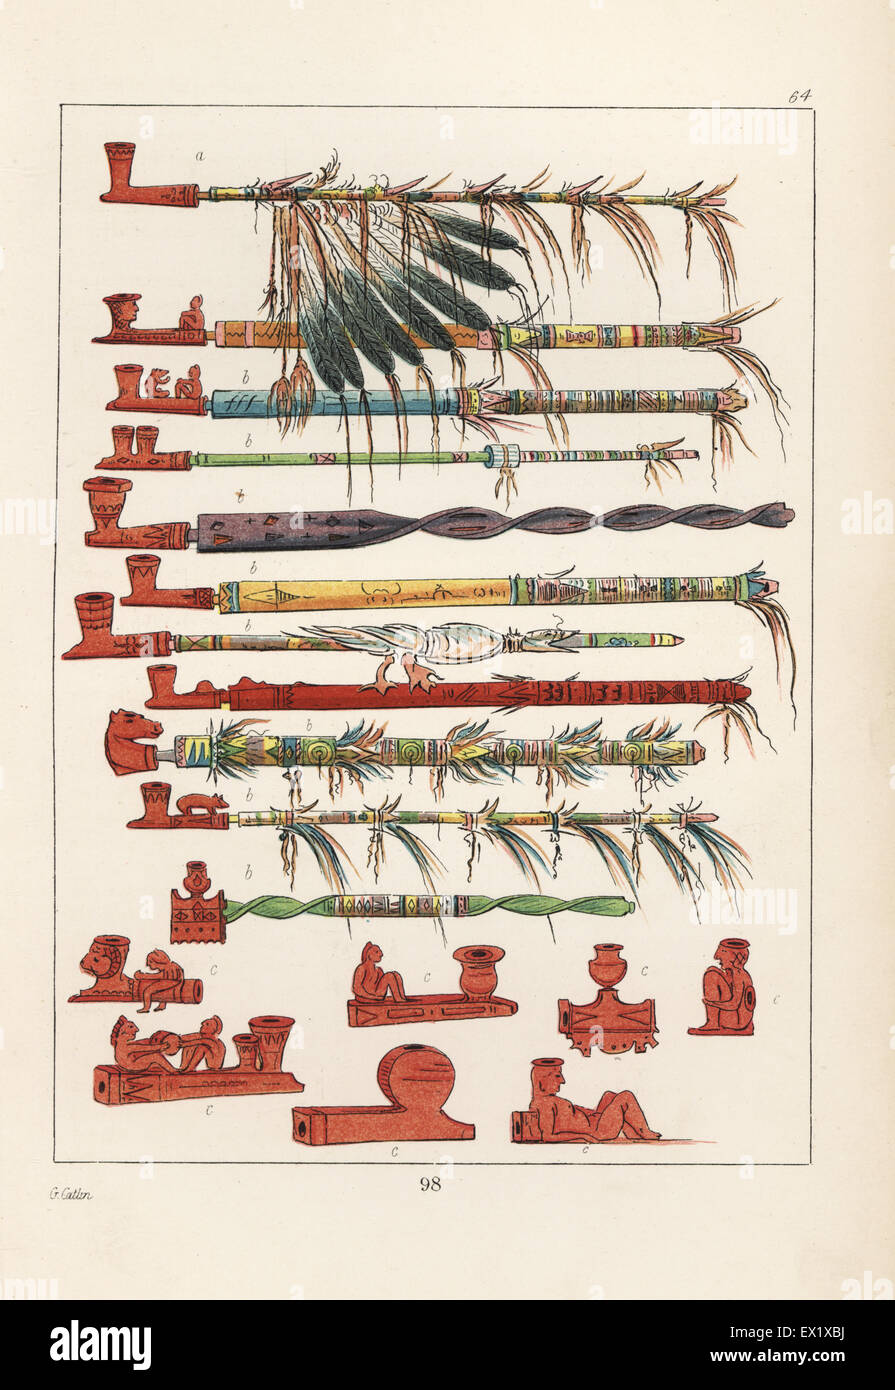 Tobacco pipes of the Native Americans, and a peace pipe with war-eagle feathers at top. The pipes are carved from pipe-stone, red steatite. Handcoloured lithograph from George Catlin's Manners, Customs and Condition of the North American Indians, London, 1841. Stock Photo